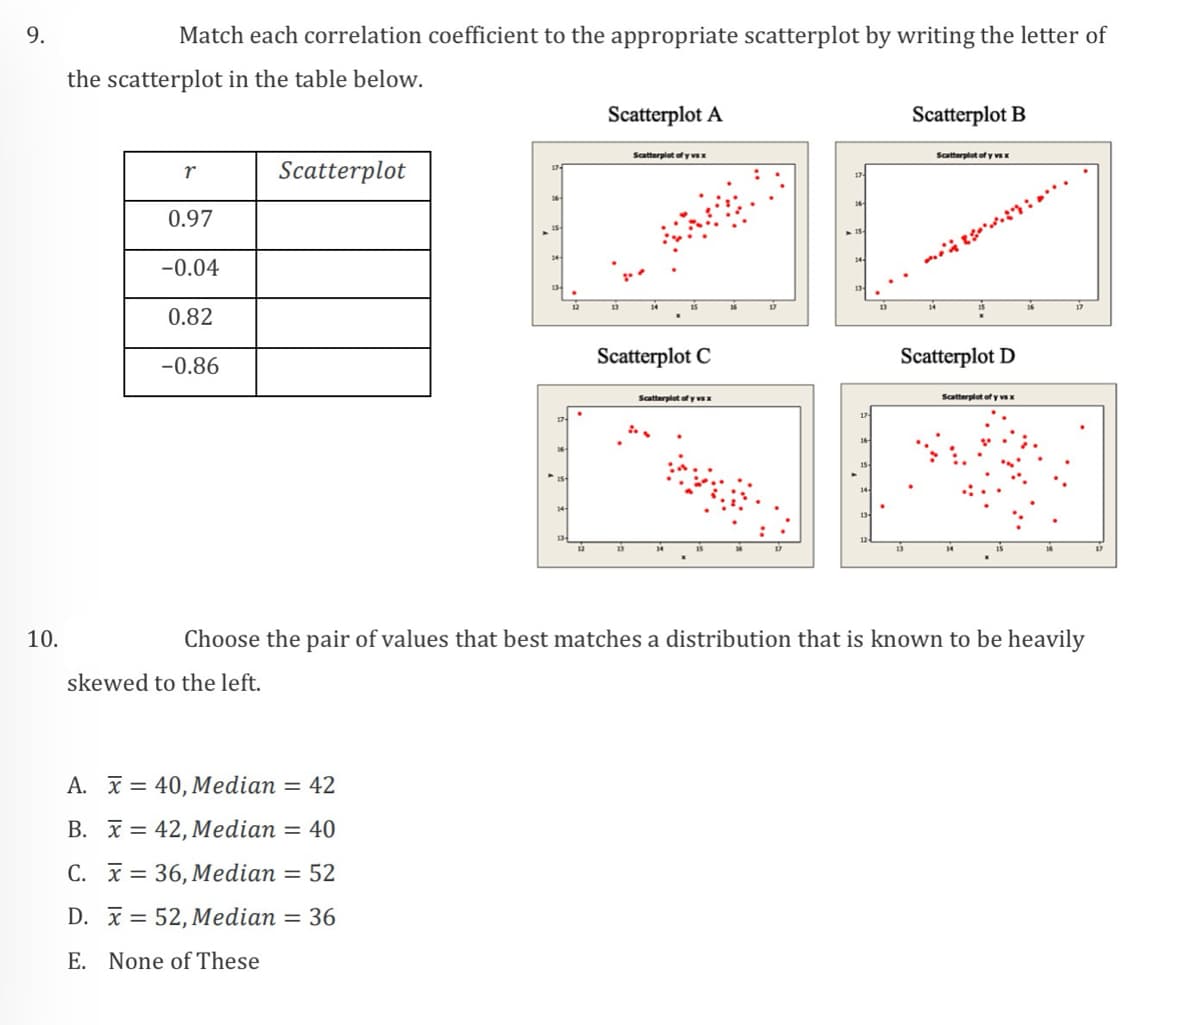 9.
10.
Match each correlation coefficient to the appropriate scatterplot by writing the letter of
the scatterplot in the table below.
r
0.97
-0.04
0.82
-0.86
Scatterplot
skewed to the left.
Scatterplot A
A. x40, Median
= 42
B. x 42, Median = 40
C. x= 36, Median = 52
D. x 52, Median = 36
E. None of These
Scatterplot of y vsx
Scatterplot C
Scatterplot of y vsx
16-
Scatterplot B
Scatterplot of y vs x
Scatterplot D
Choose the pair of values that best matches a distribution that is known to be heavily
Scatterplot of y vs x